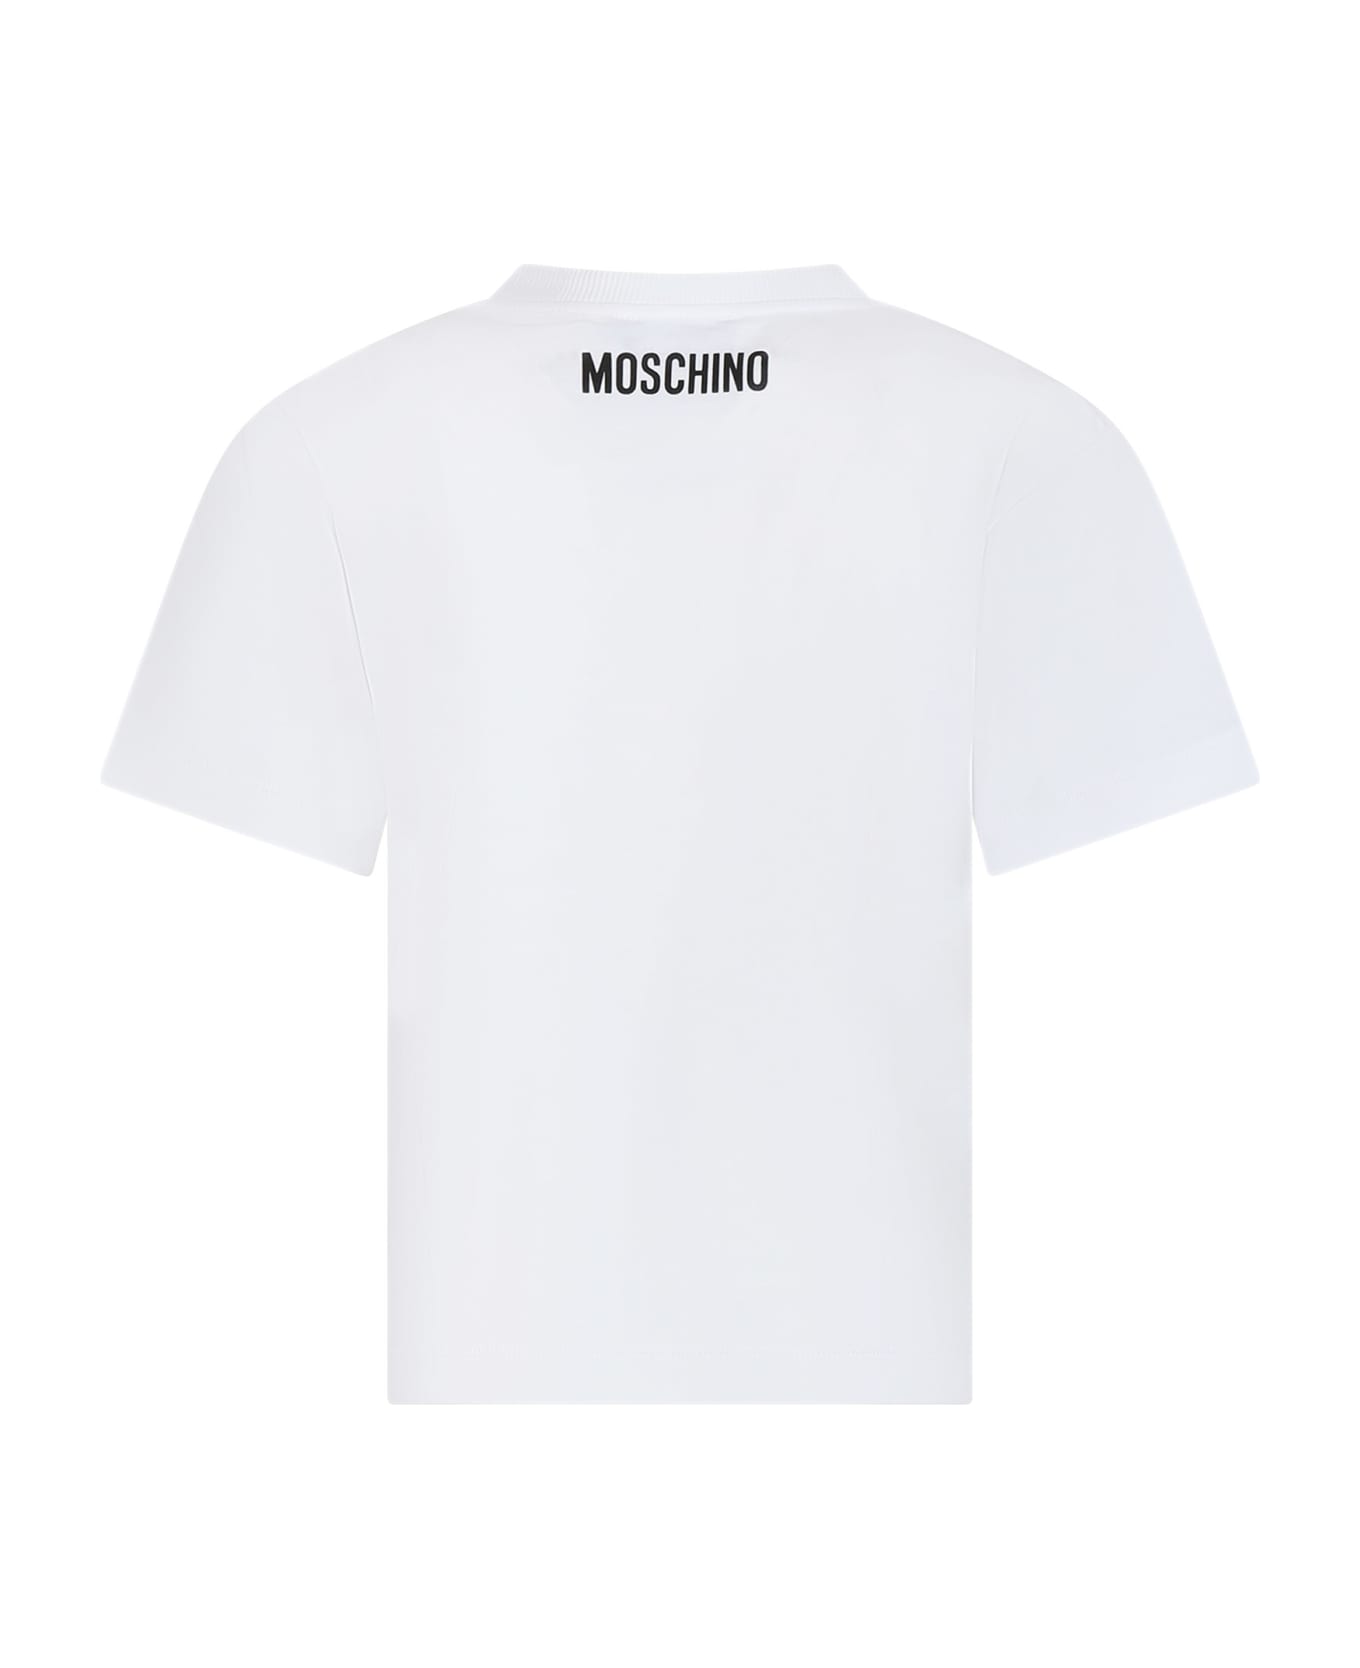 Moschino White T-shirt For Kids With Question Mark - White